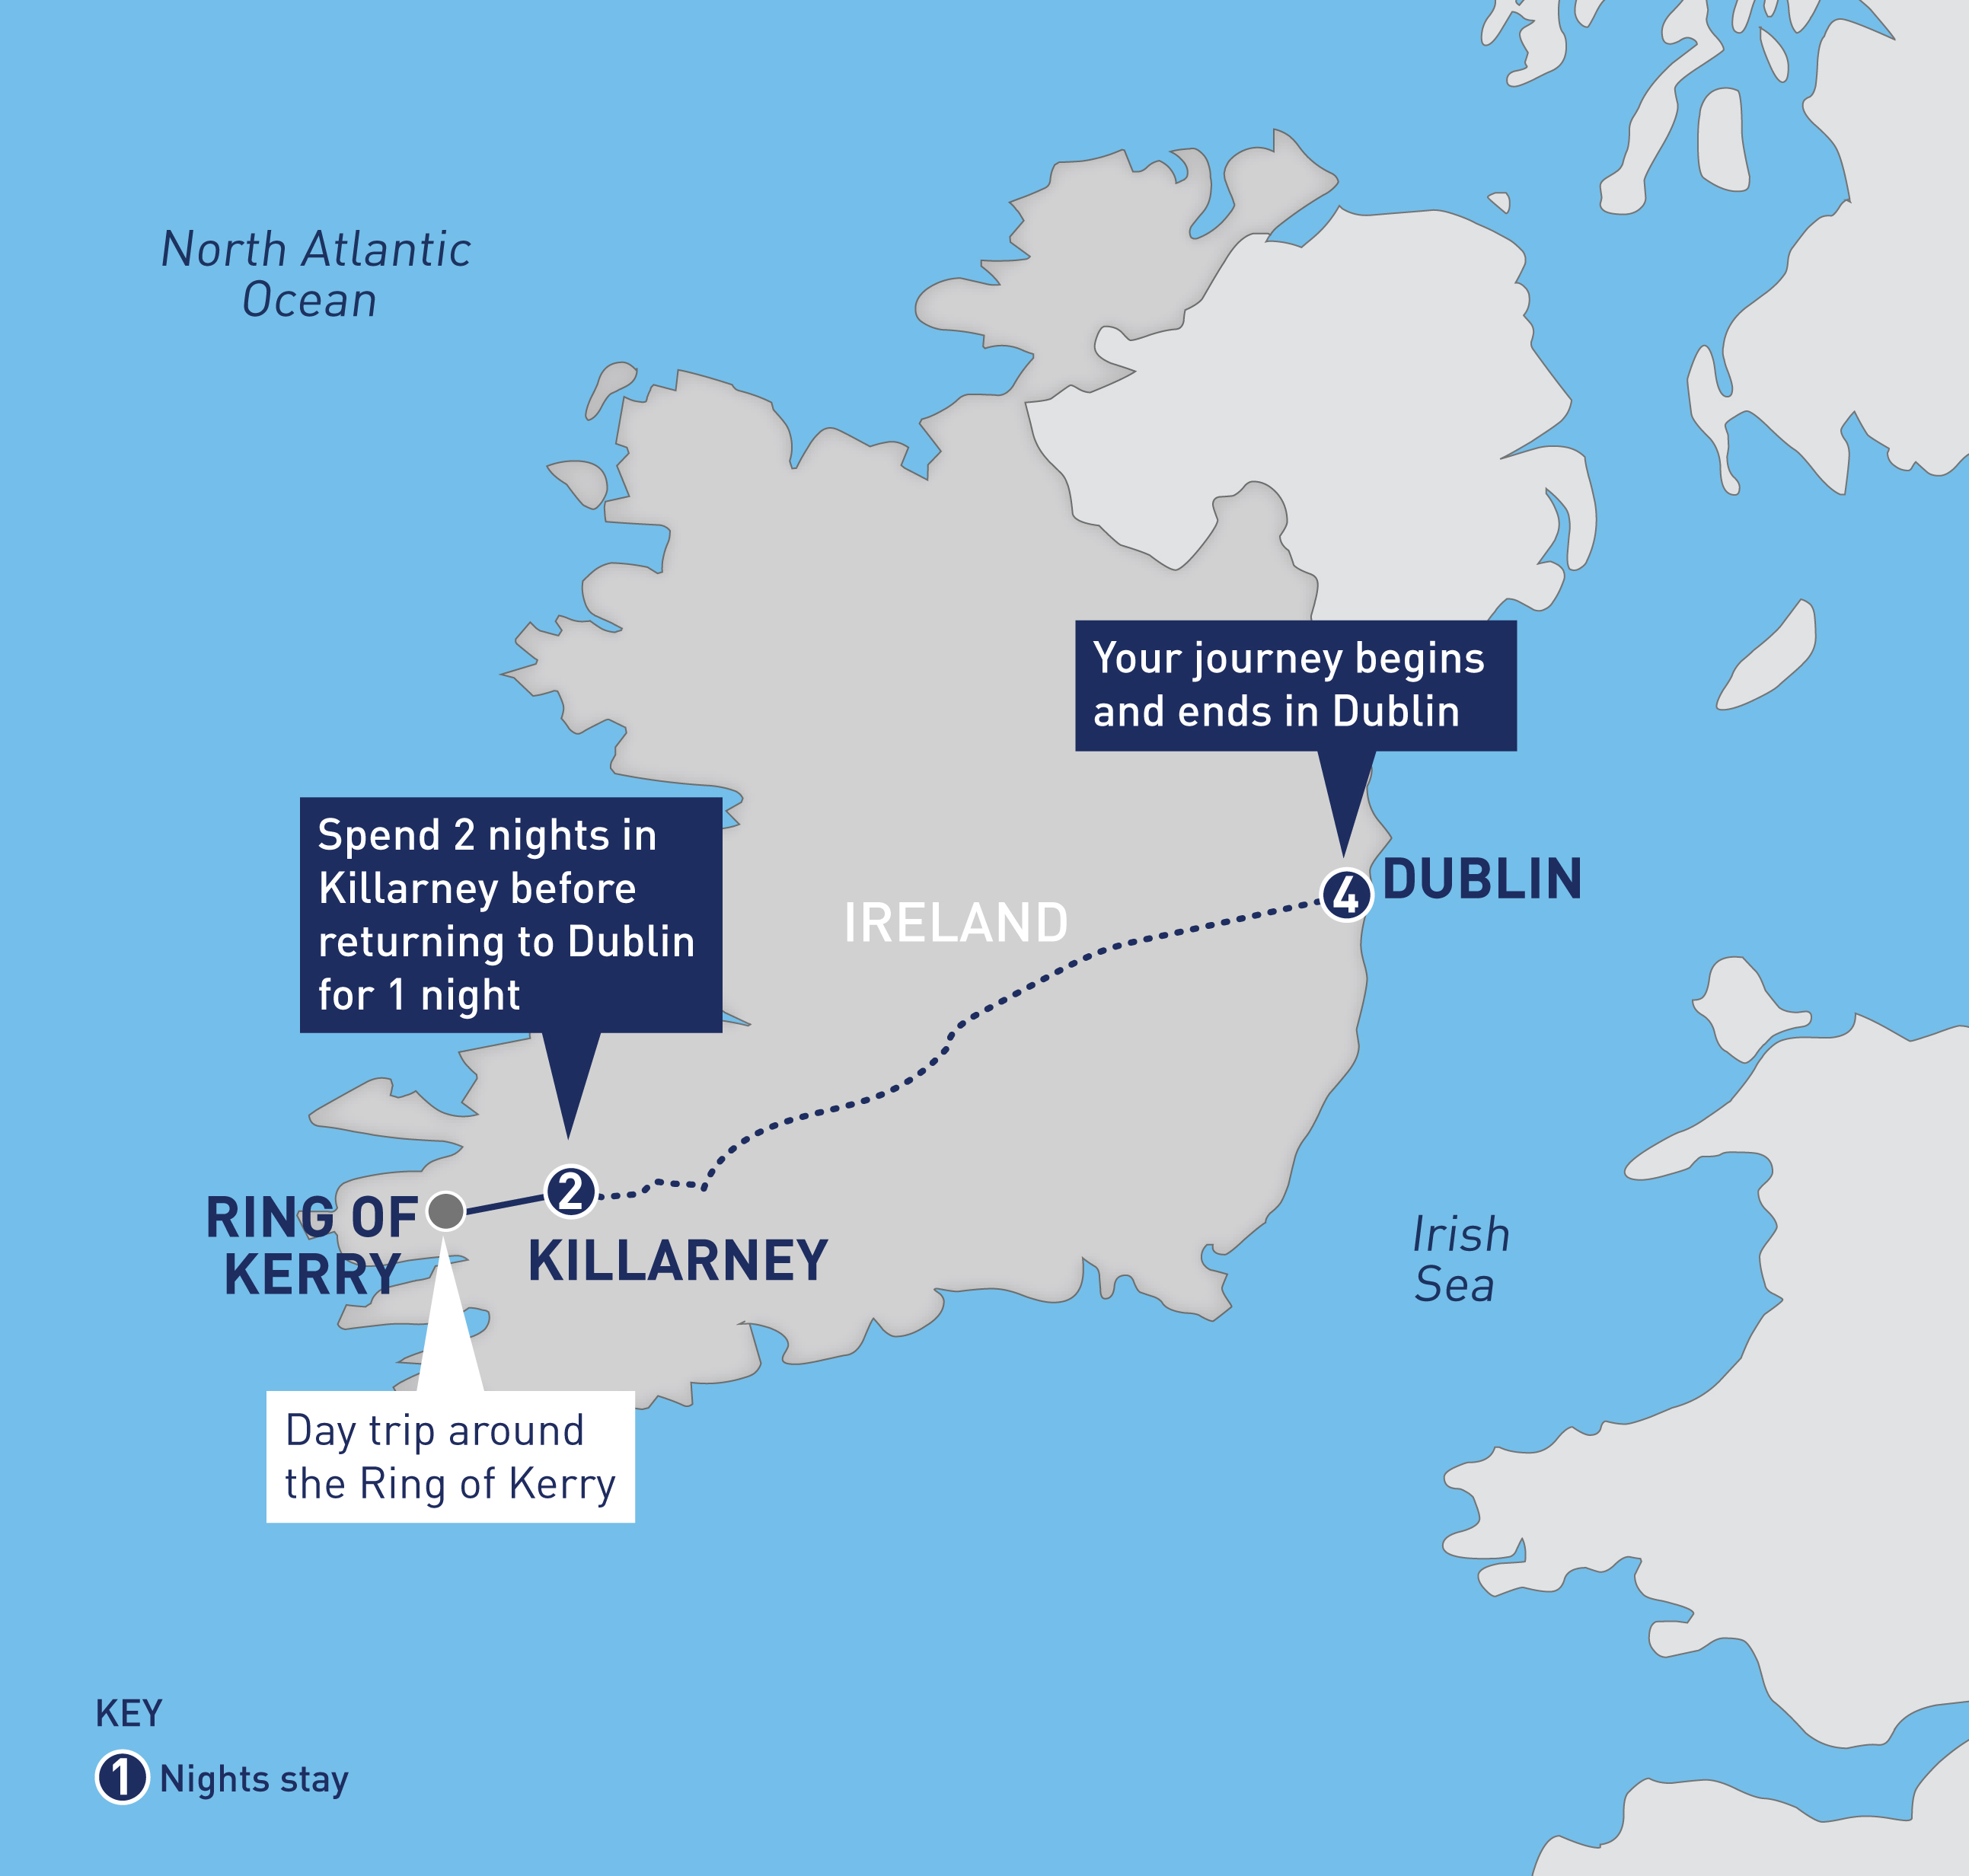 Full-Day Excursion to the Scenic Ring of Kerry Day from Dublin by Train  tours, activities, fun things to do in Dublin(Ireland)｜VELTRA